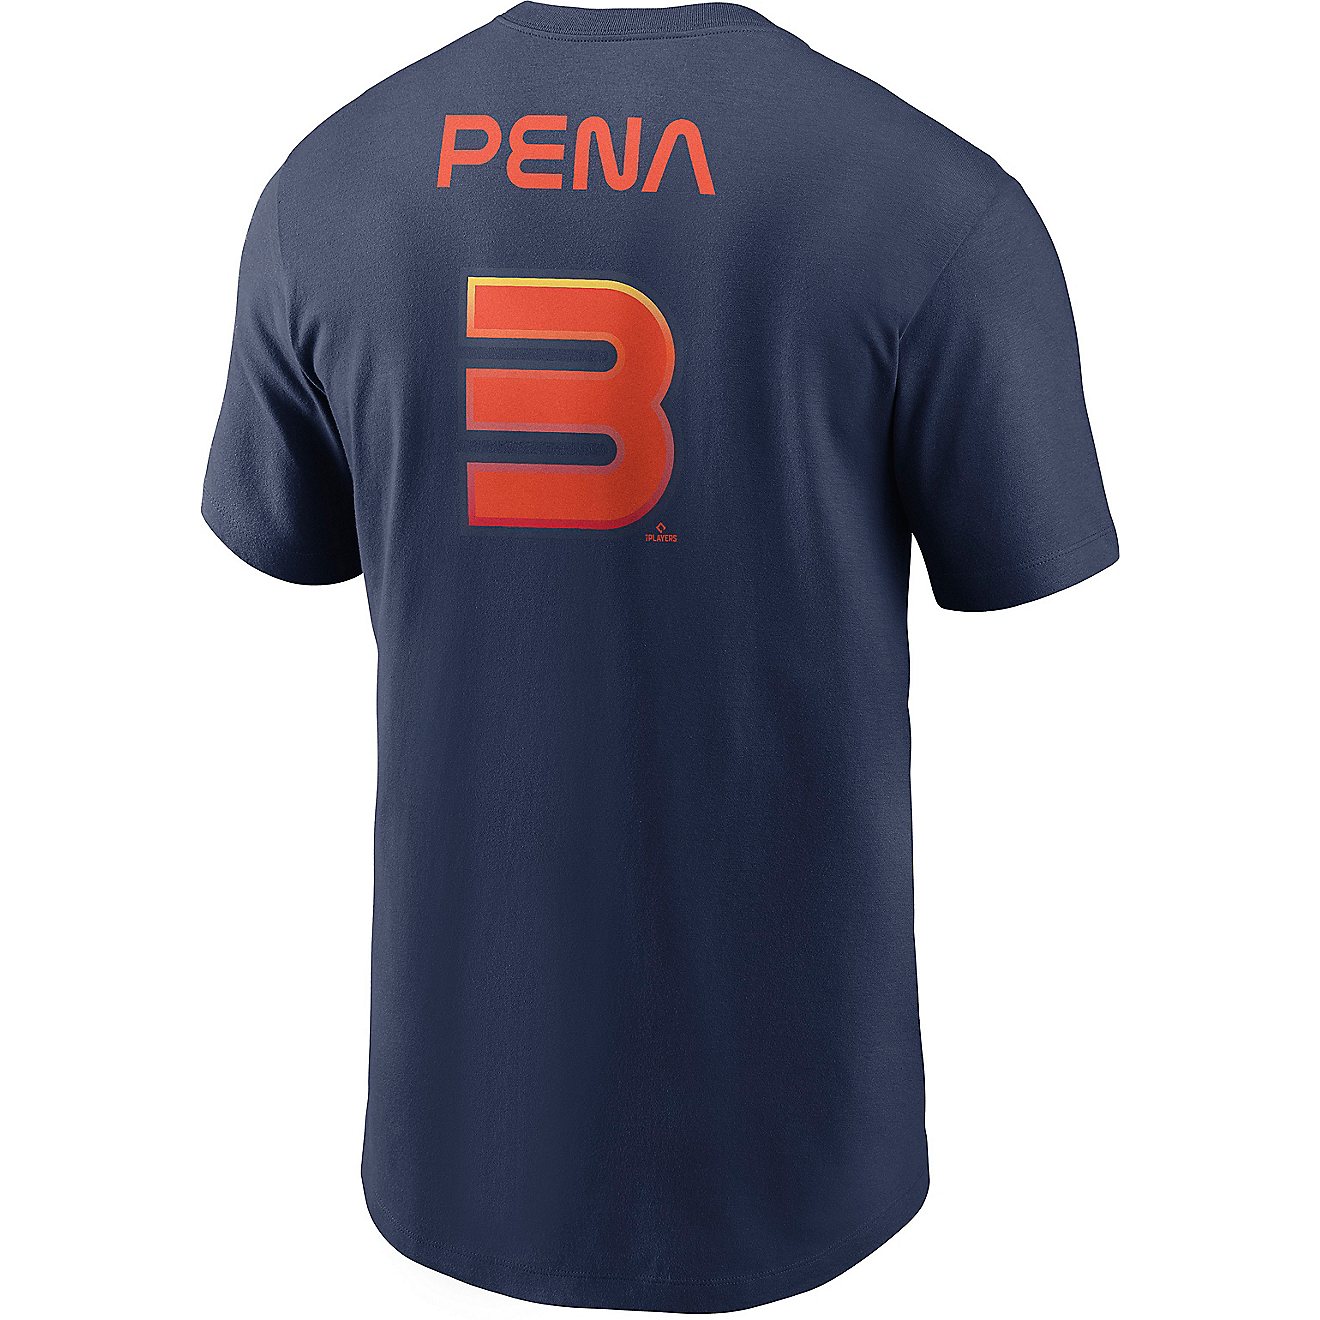 pena city connect jersey